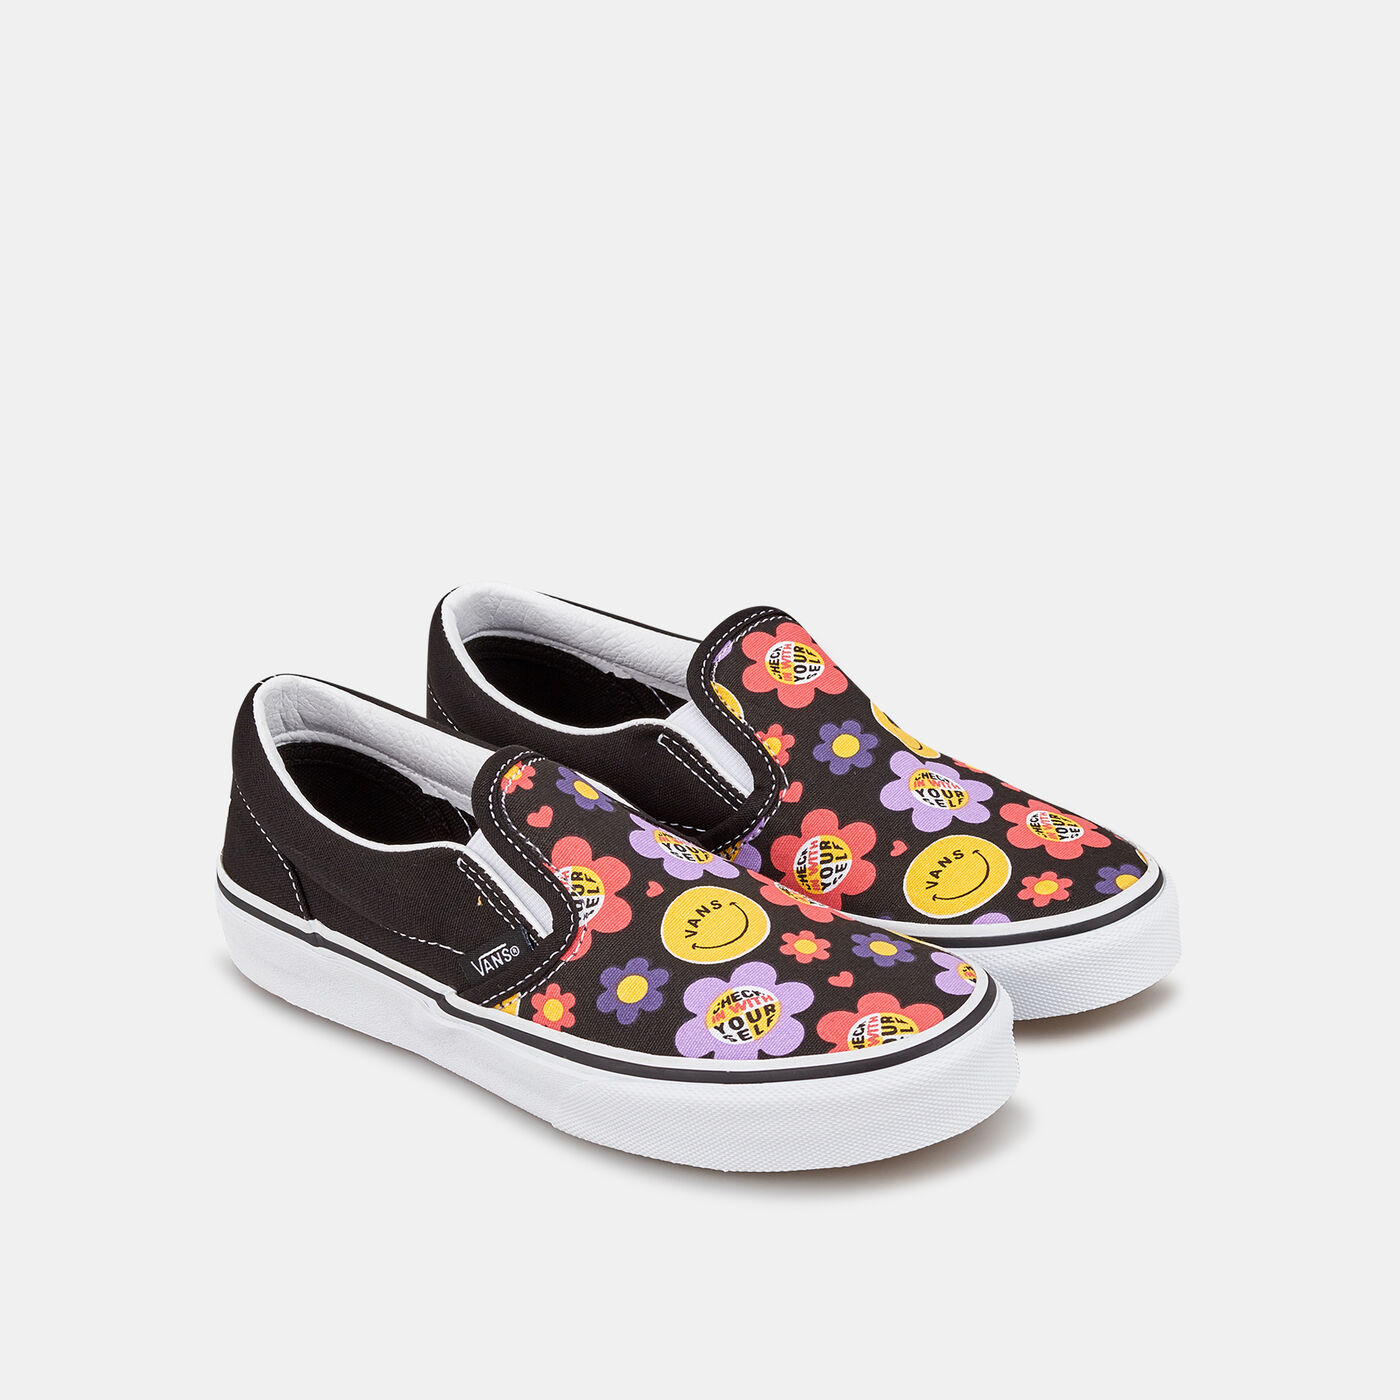 Kids' Classic Slip-On Shoe (Younger Kids)